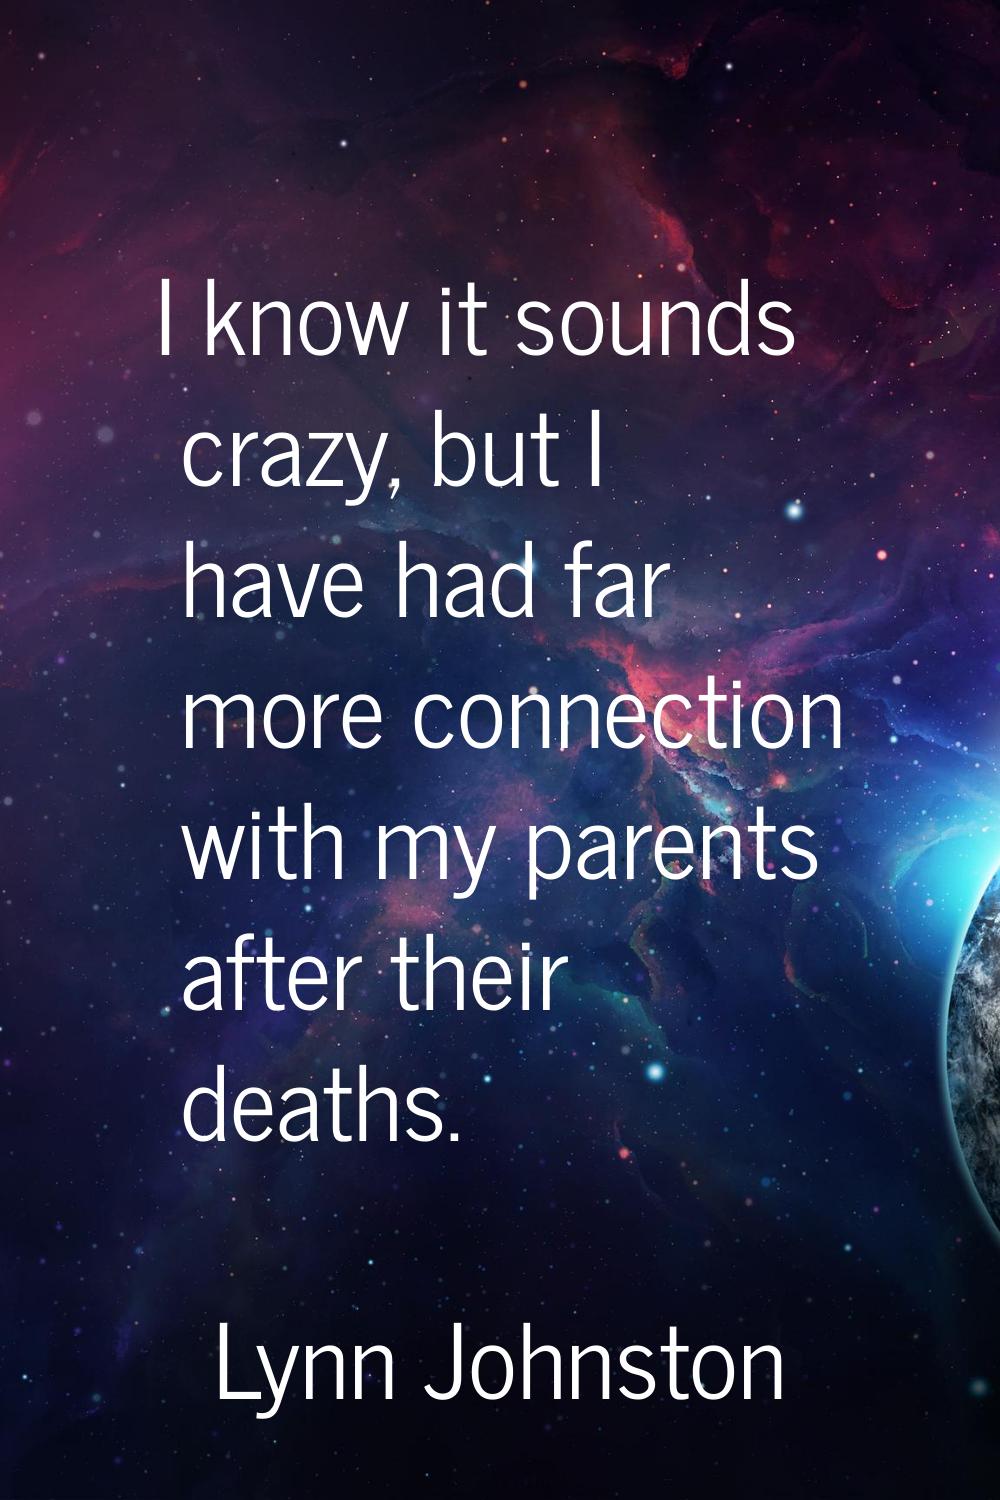 I know it sounds crazy, but I have had far more connection with my parents after their deaths.